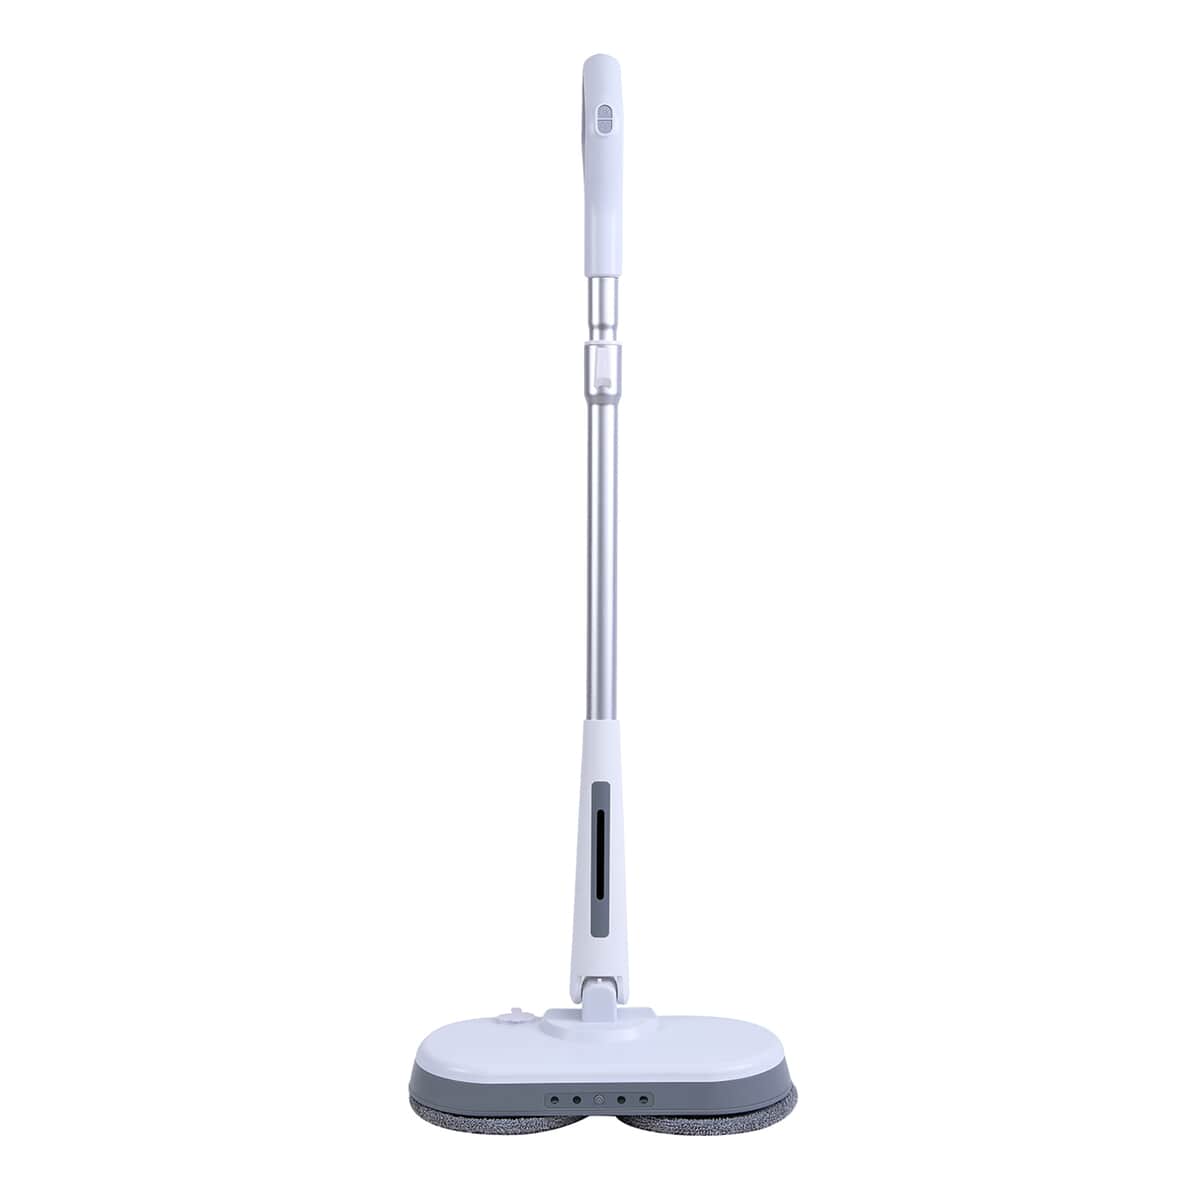 Homesmart White and Gray Cordless Electric Spin Mop with 280ml Water Tank and Built-in 4 LED Light image number 0